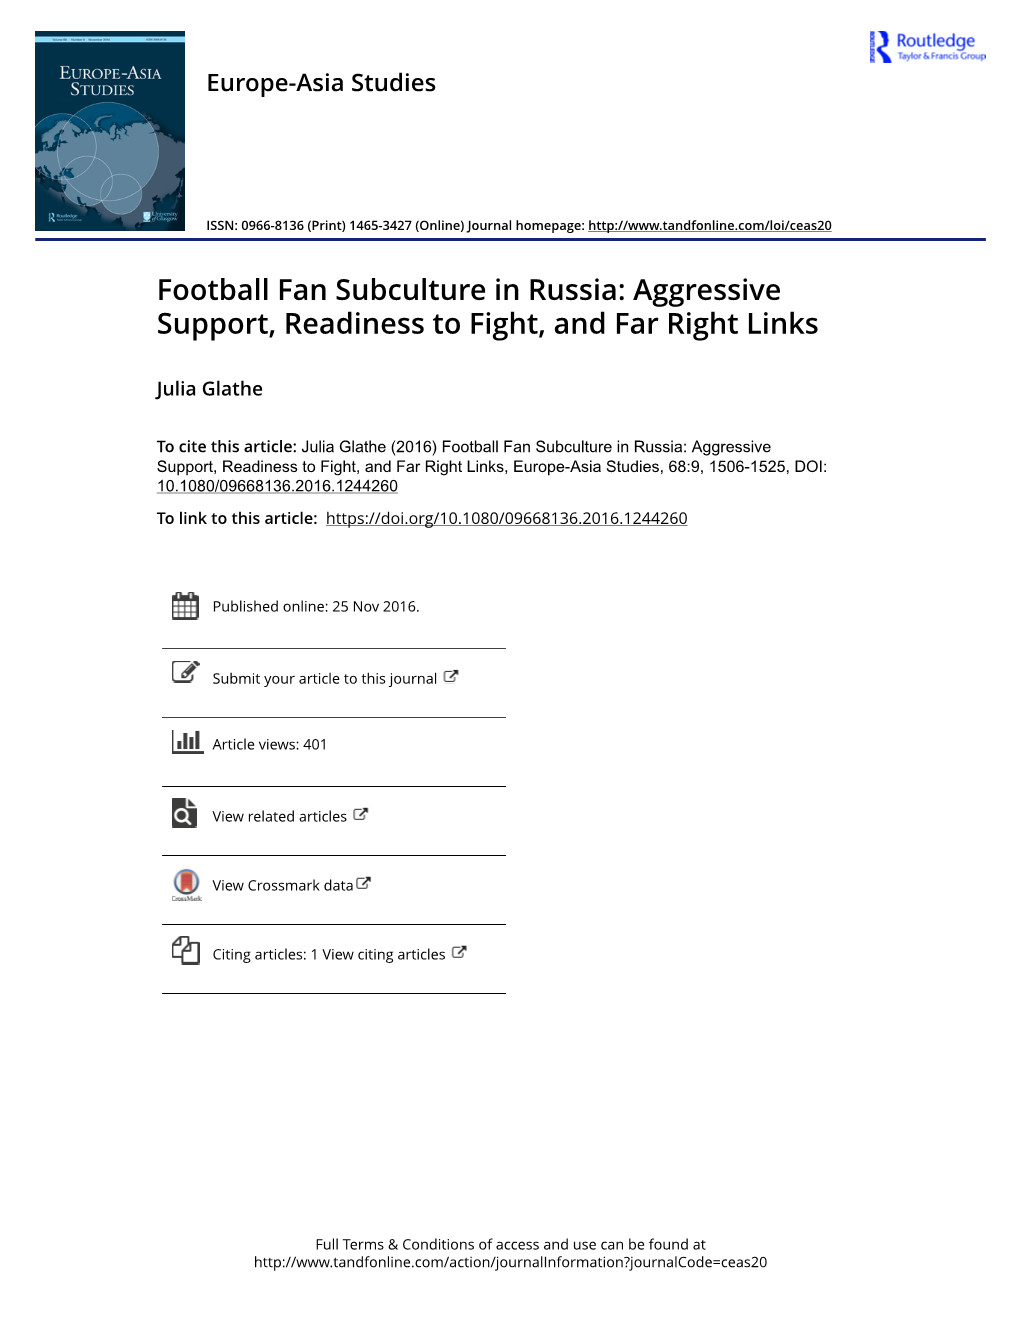 Football Fan Subculture in Russia: Aggressive Support, Readiness to Fight, and Far Right Links